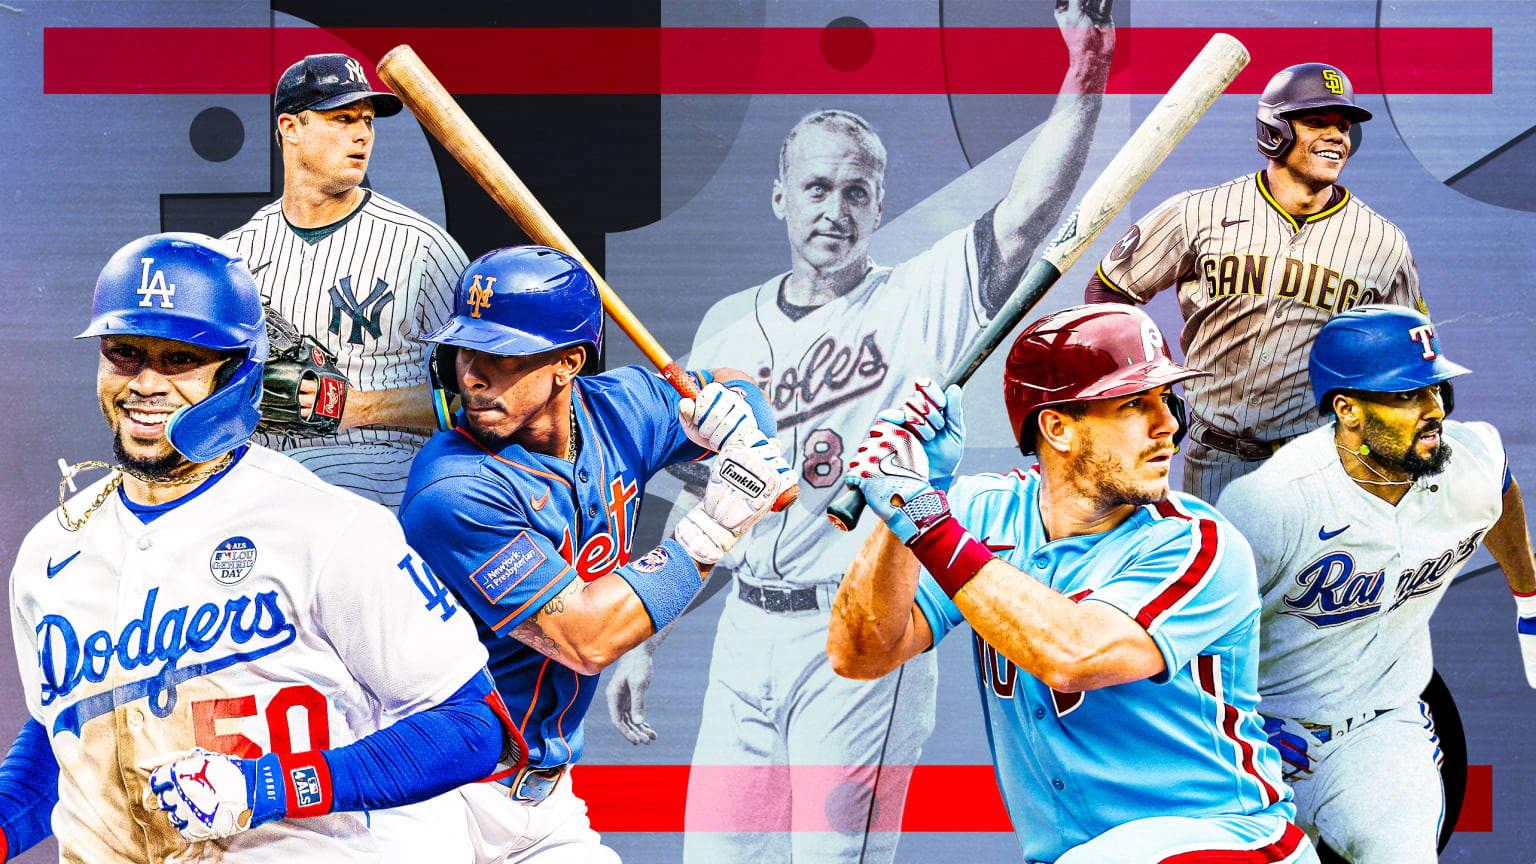 A photo illustration of six current players surrounding an image of Cal Ripken Jr.